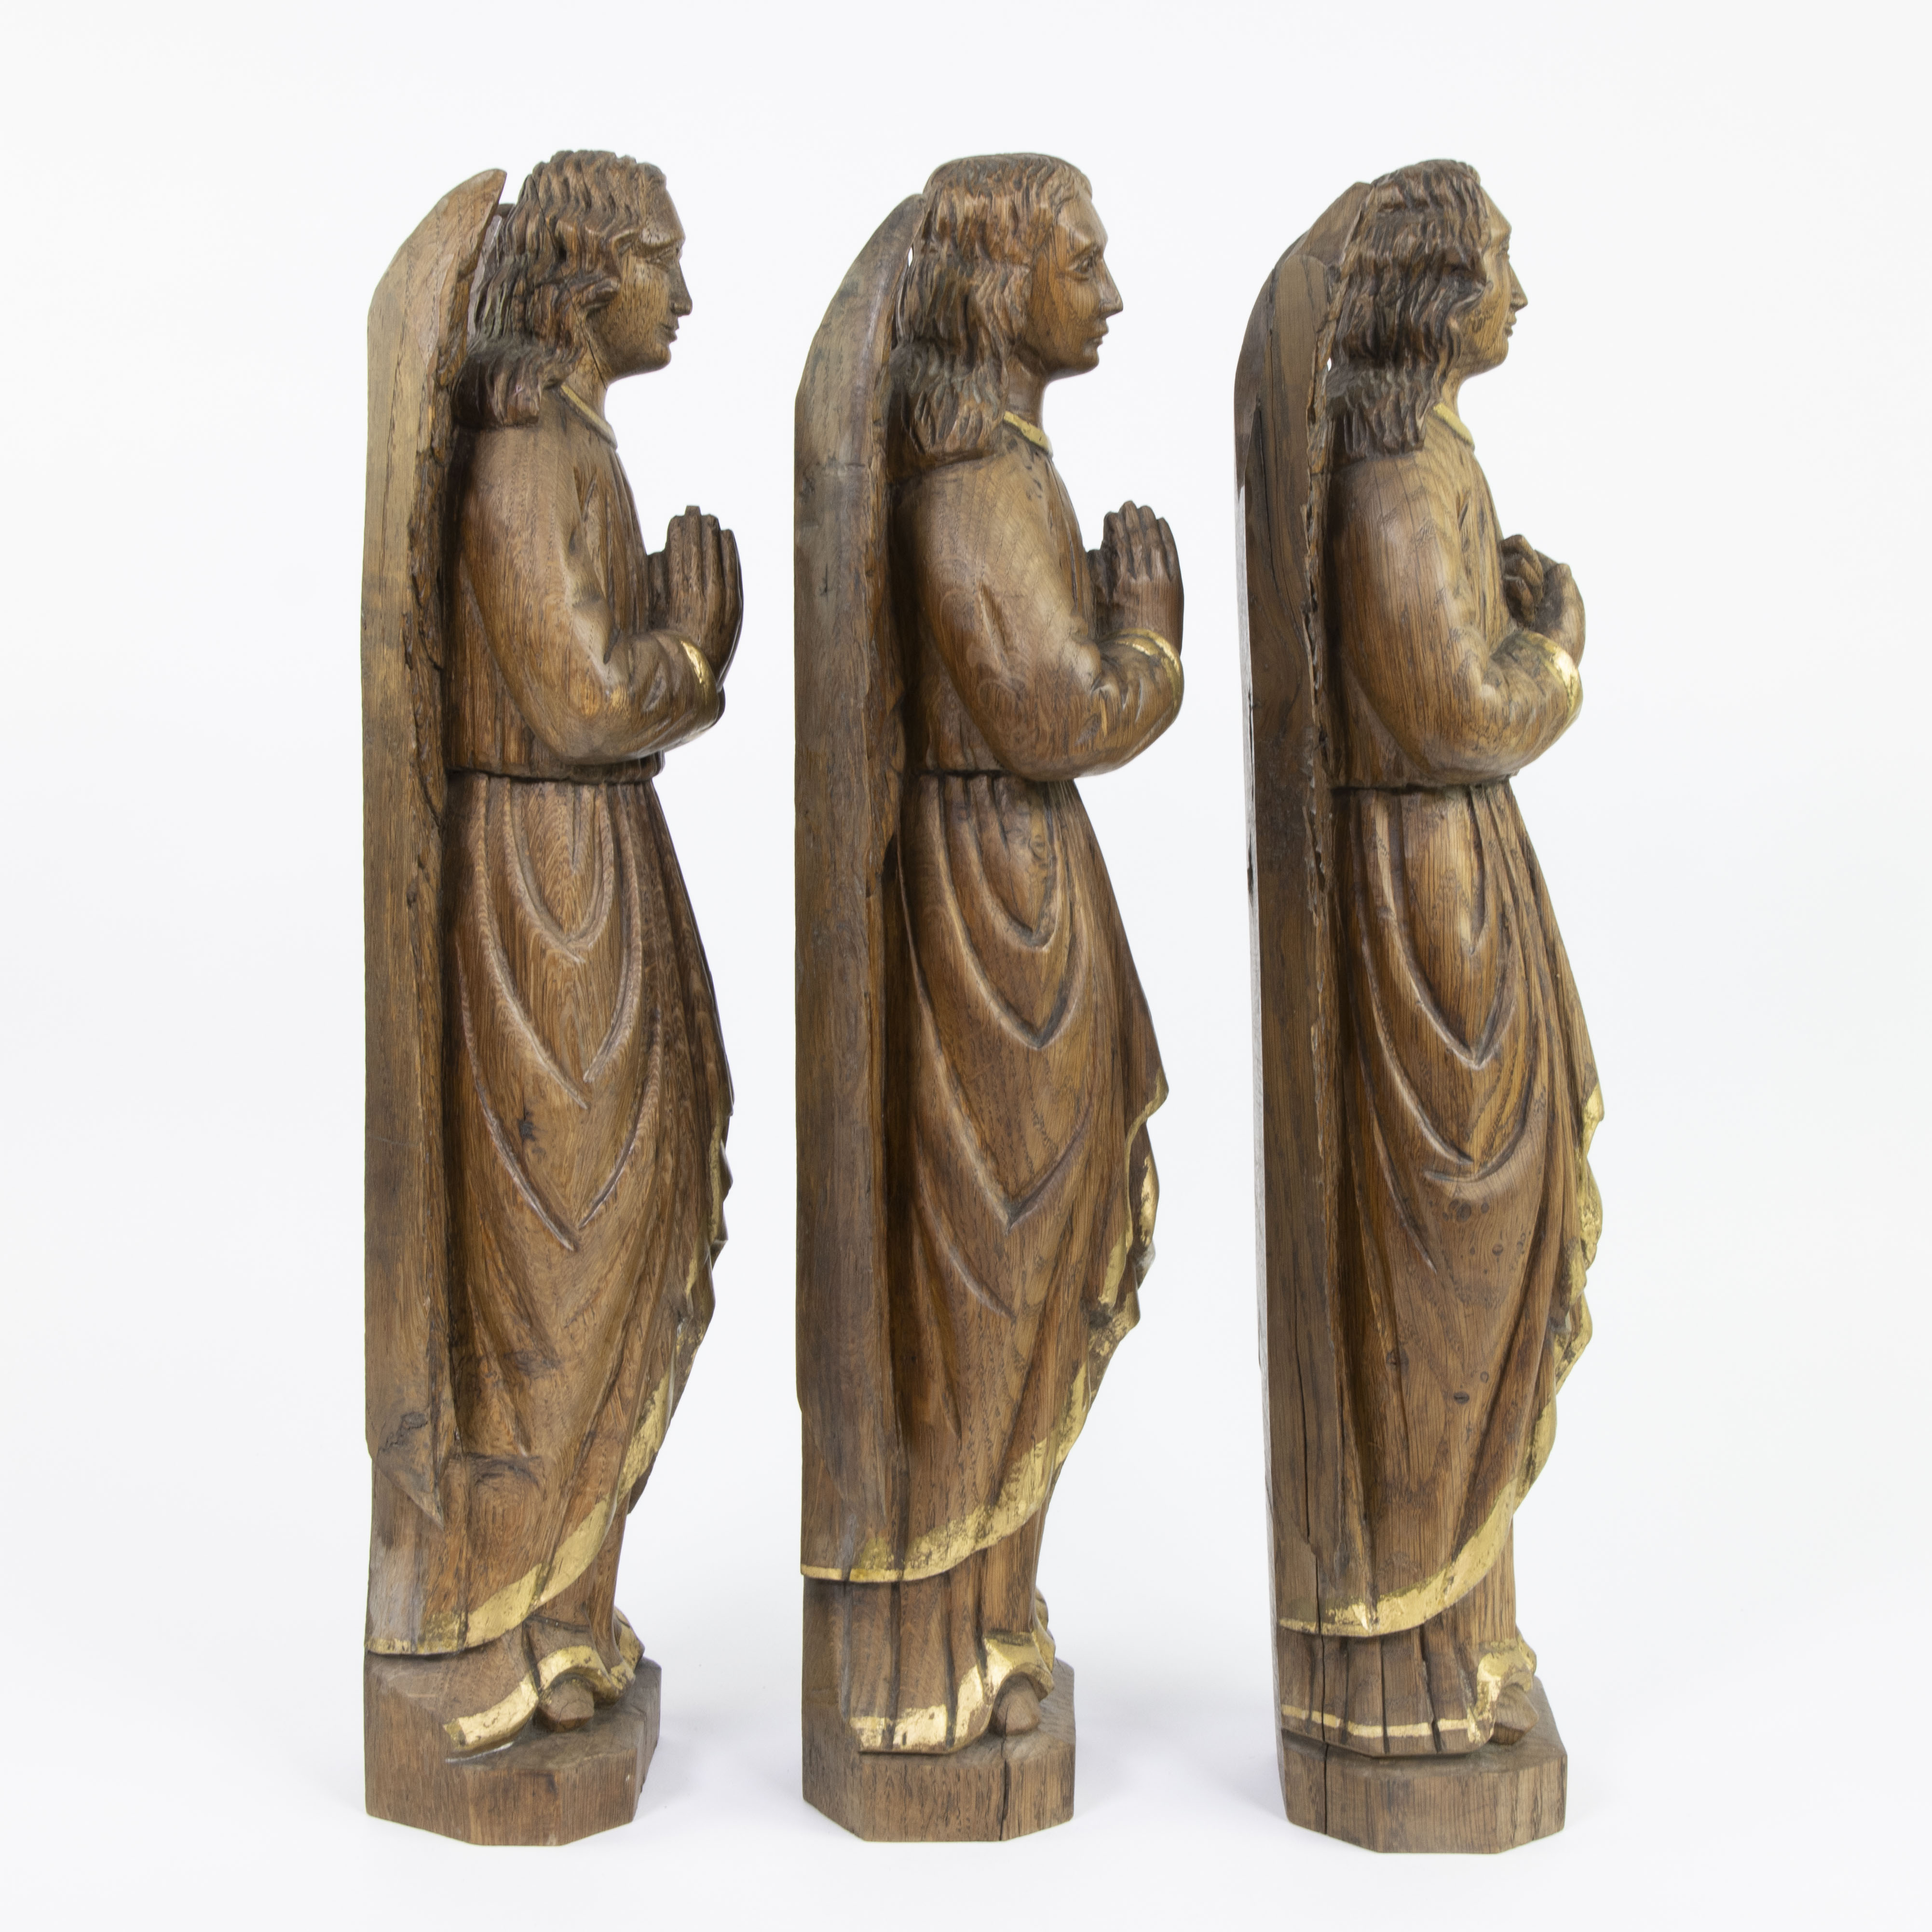 Lot of 3 19th century wooden angels - Image 4 of 5